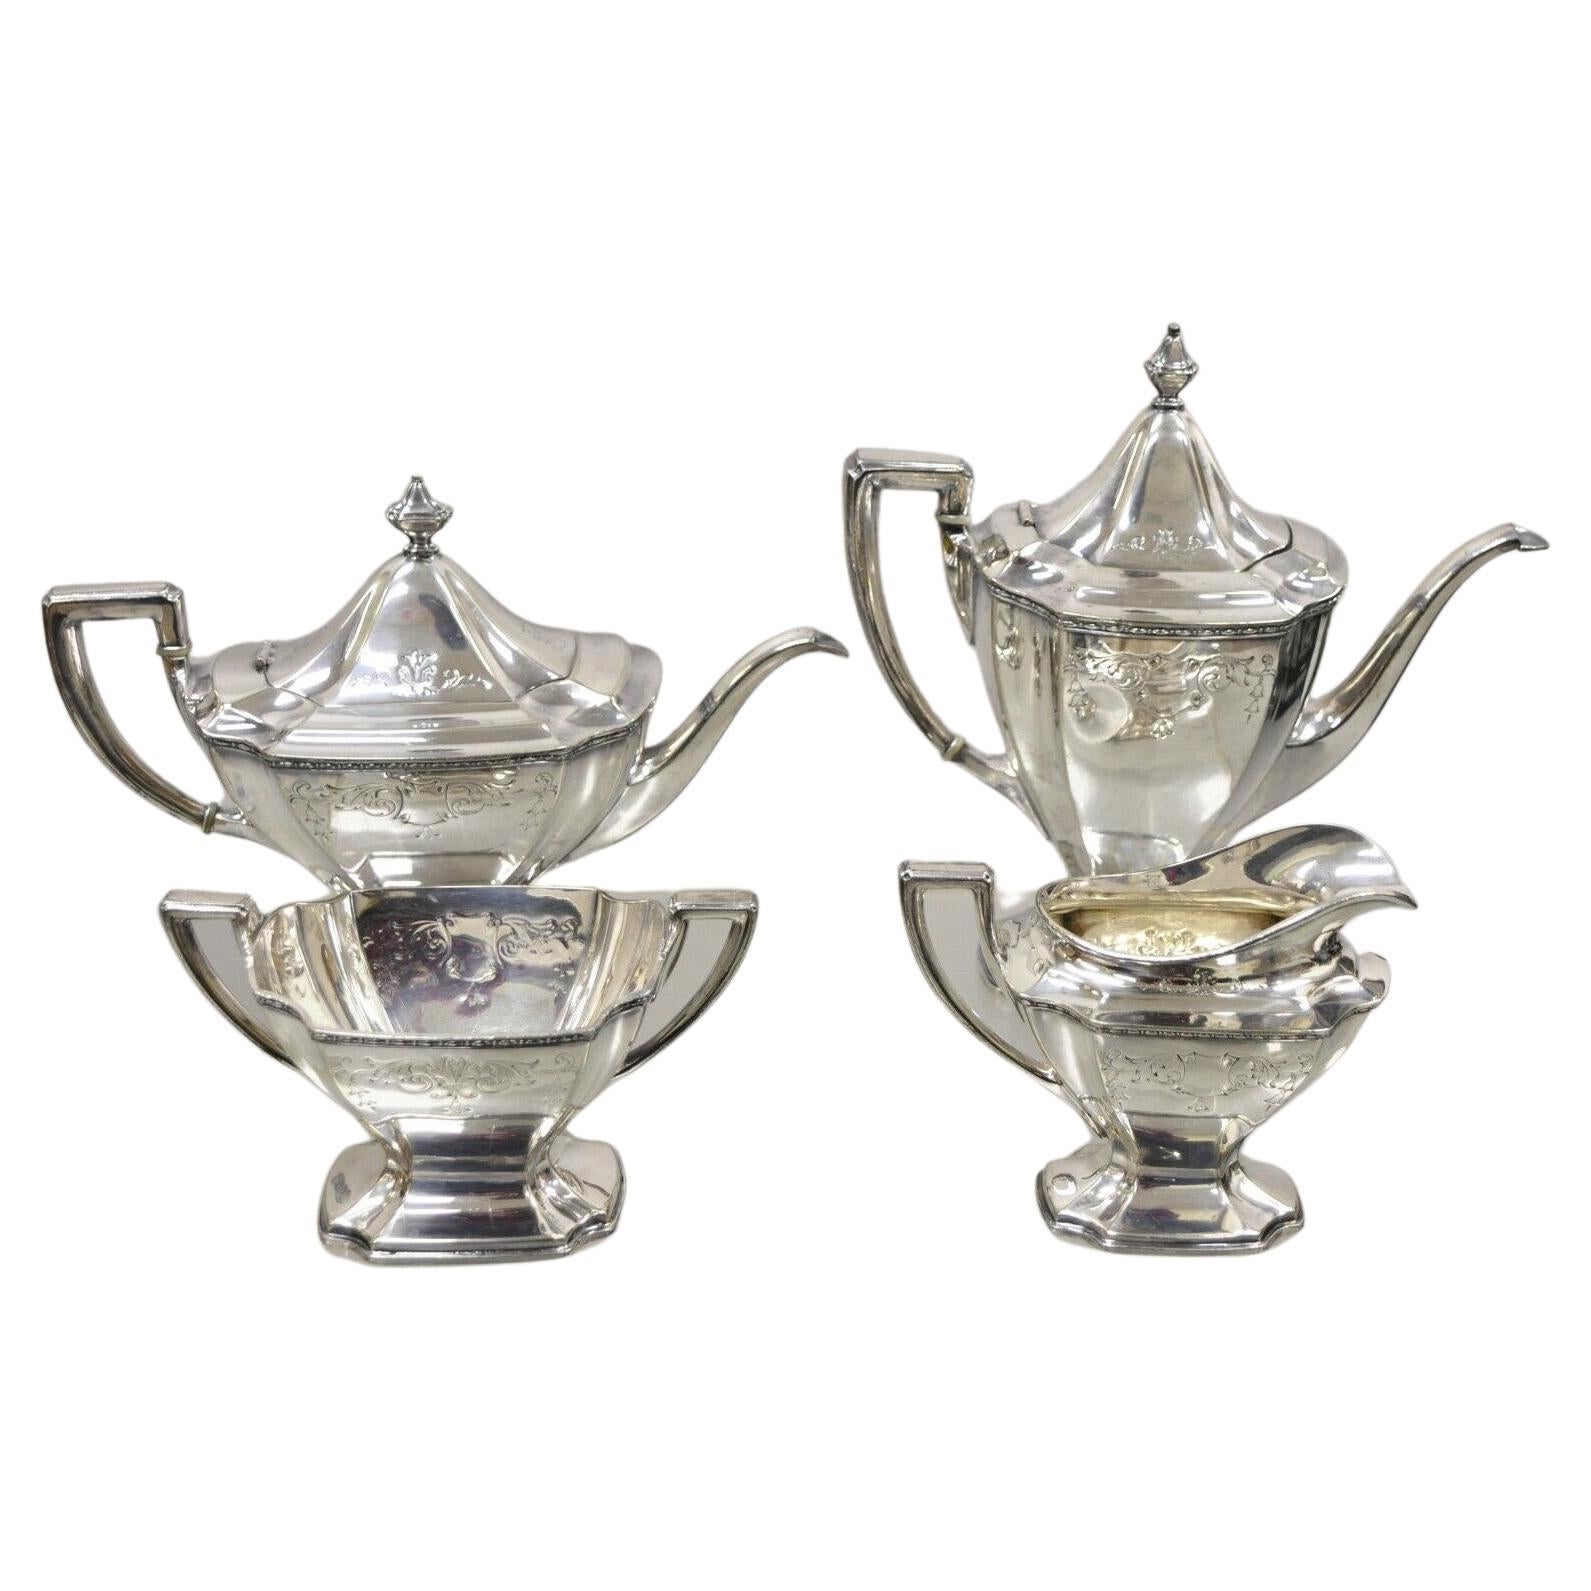 WD Smith Silver Co Chippendale EPNS Hepplewhite Silver Plated Tea Set - 4 pcs For Sale